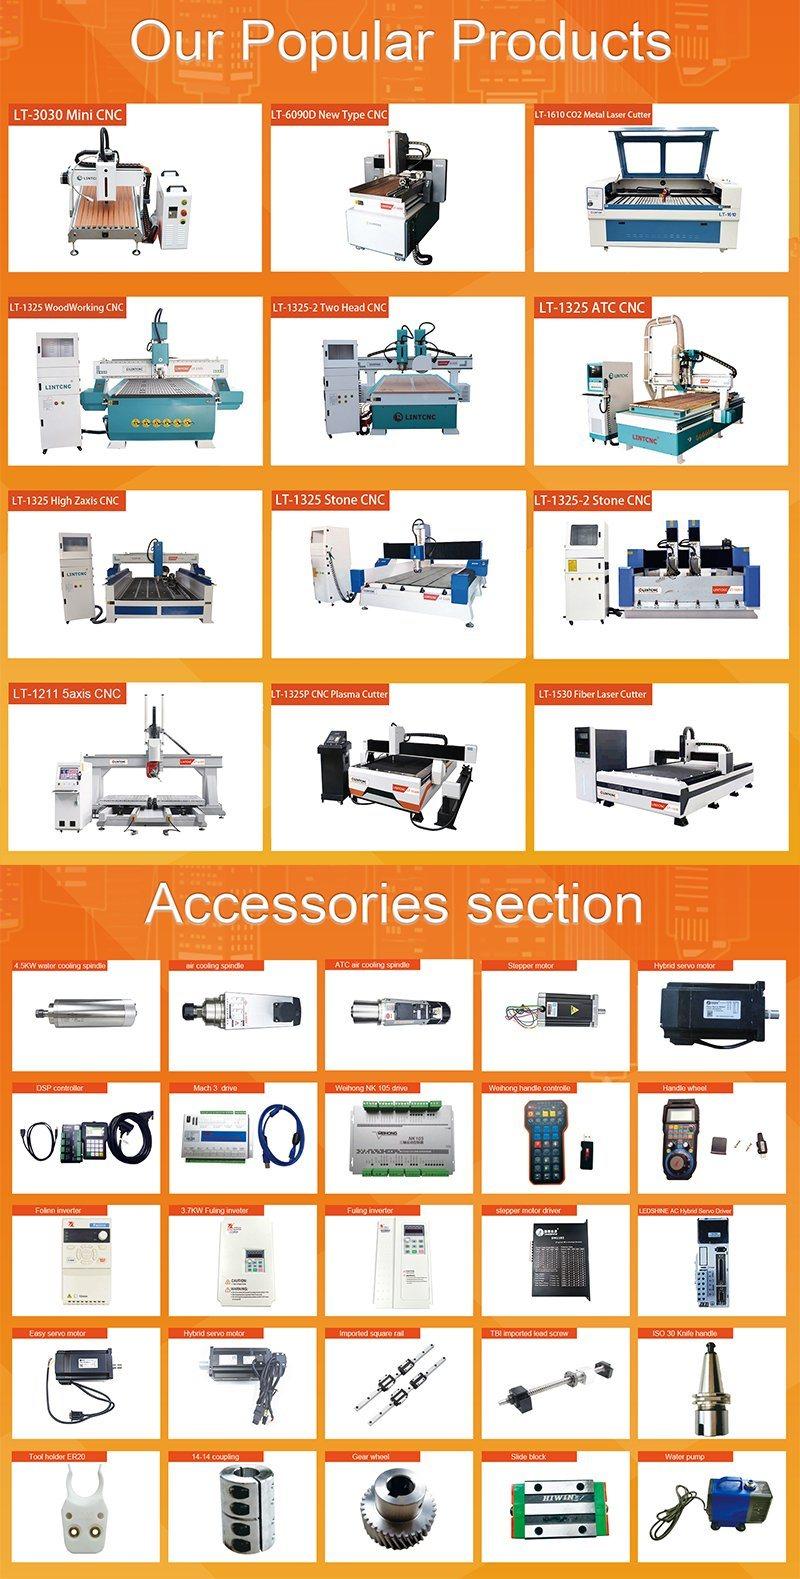 Cheap Price 4axis 3D Woodwoorking Carving Cutting 1325 1530 2030 2130 2040 CNC Router Machine with Atc Tool Changer for Foam Furniture Cabniet Board Making